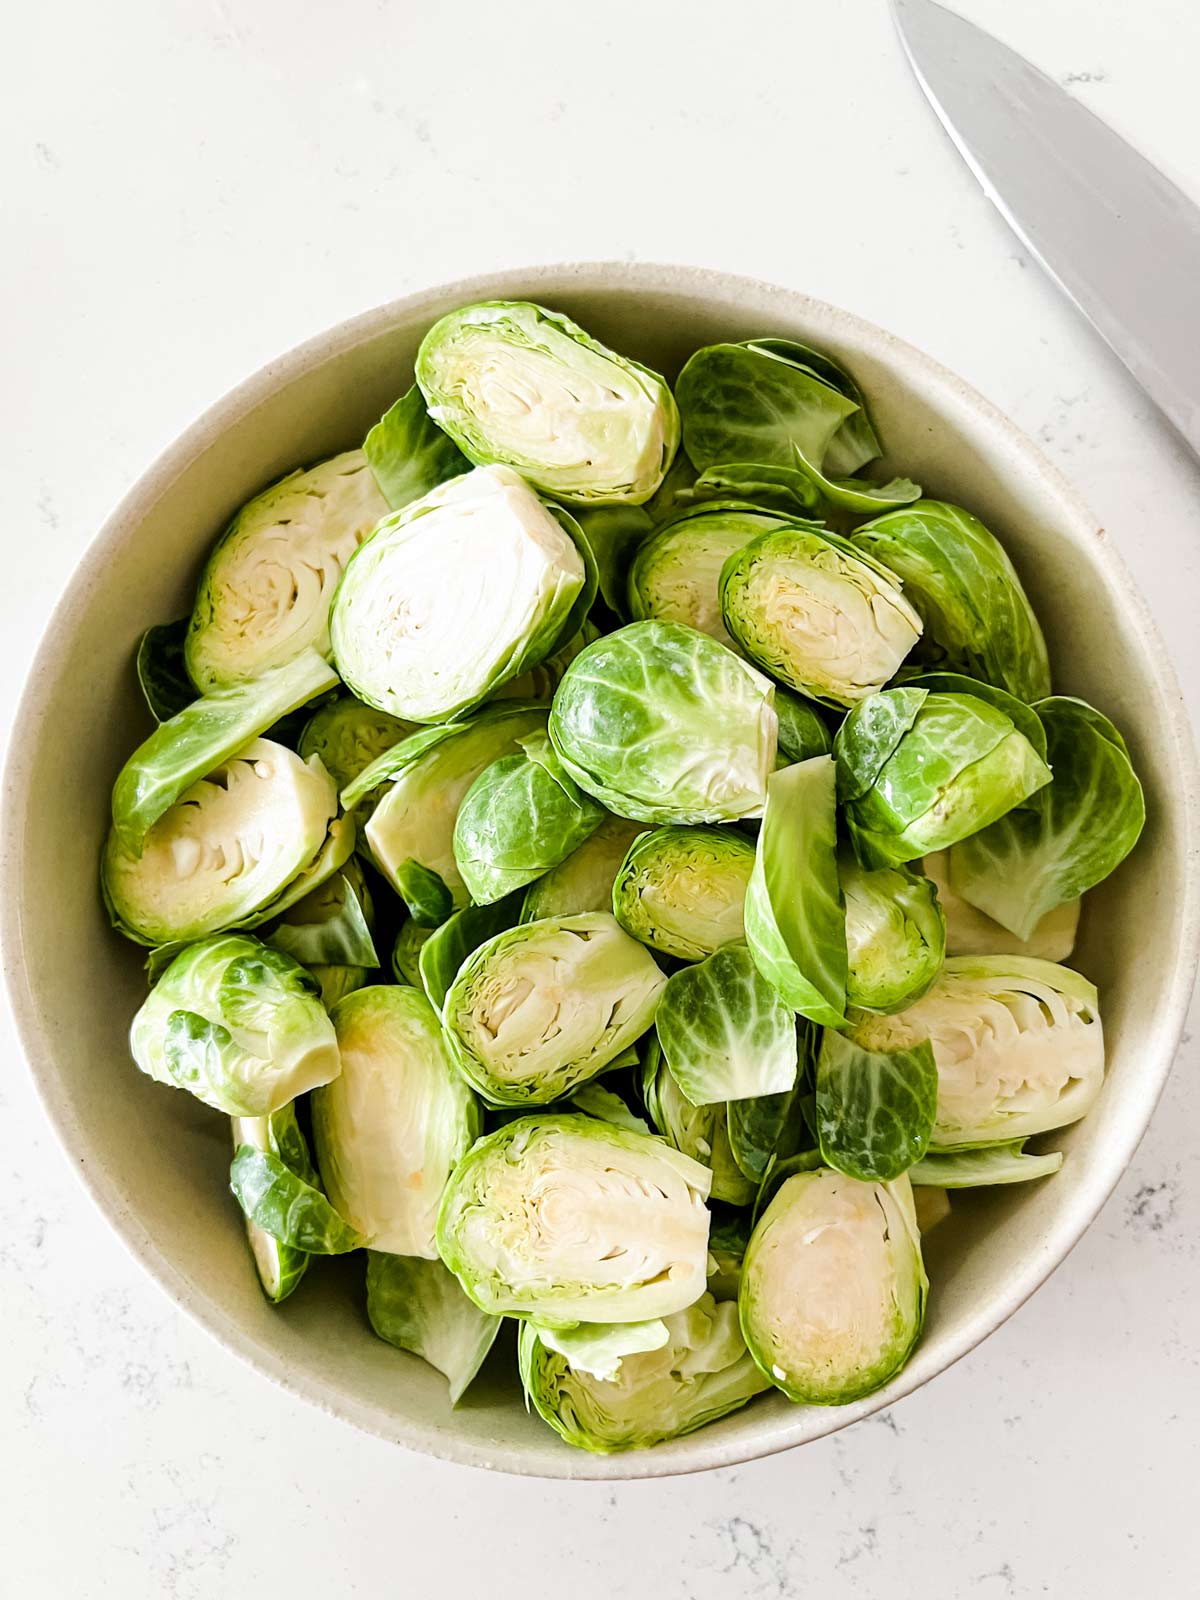 A bowl of trimmed Brussels sprouts.